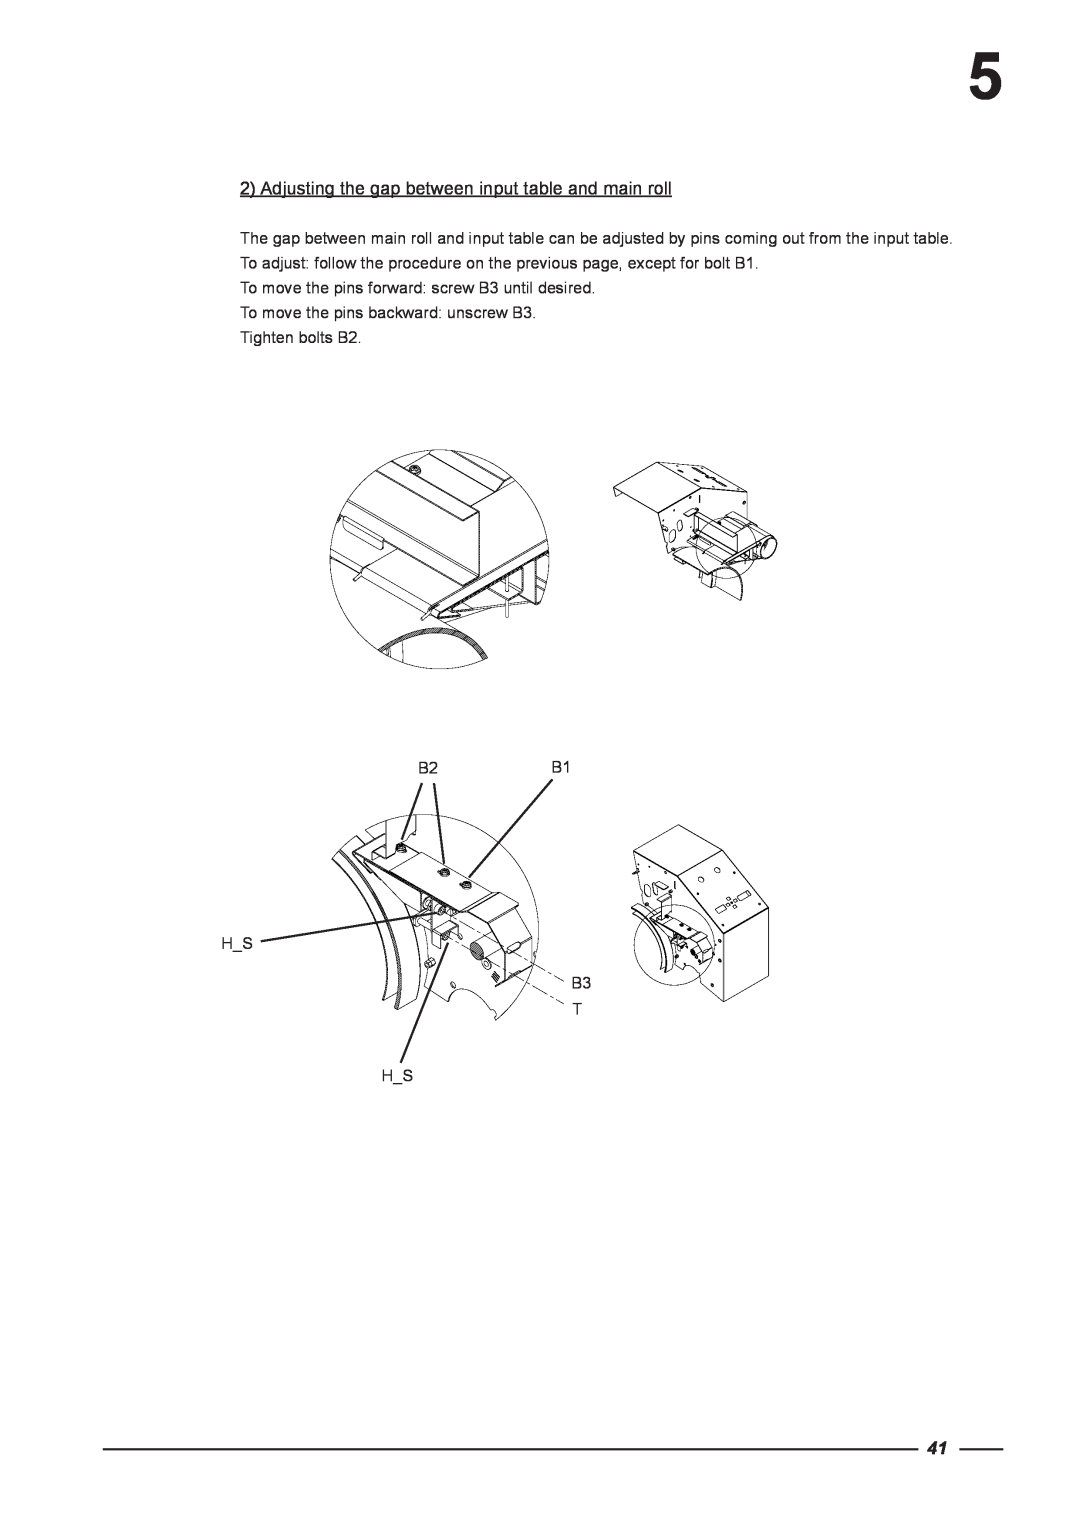 Alliance Laundry Systems CI 2050/325, CI 1650/325 instruction manual Adjusting the gap between input table and main roll 